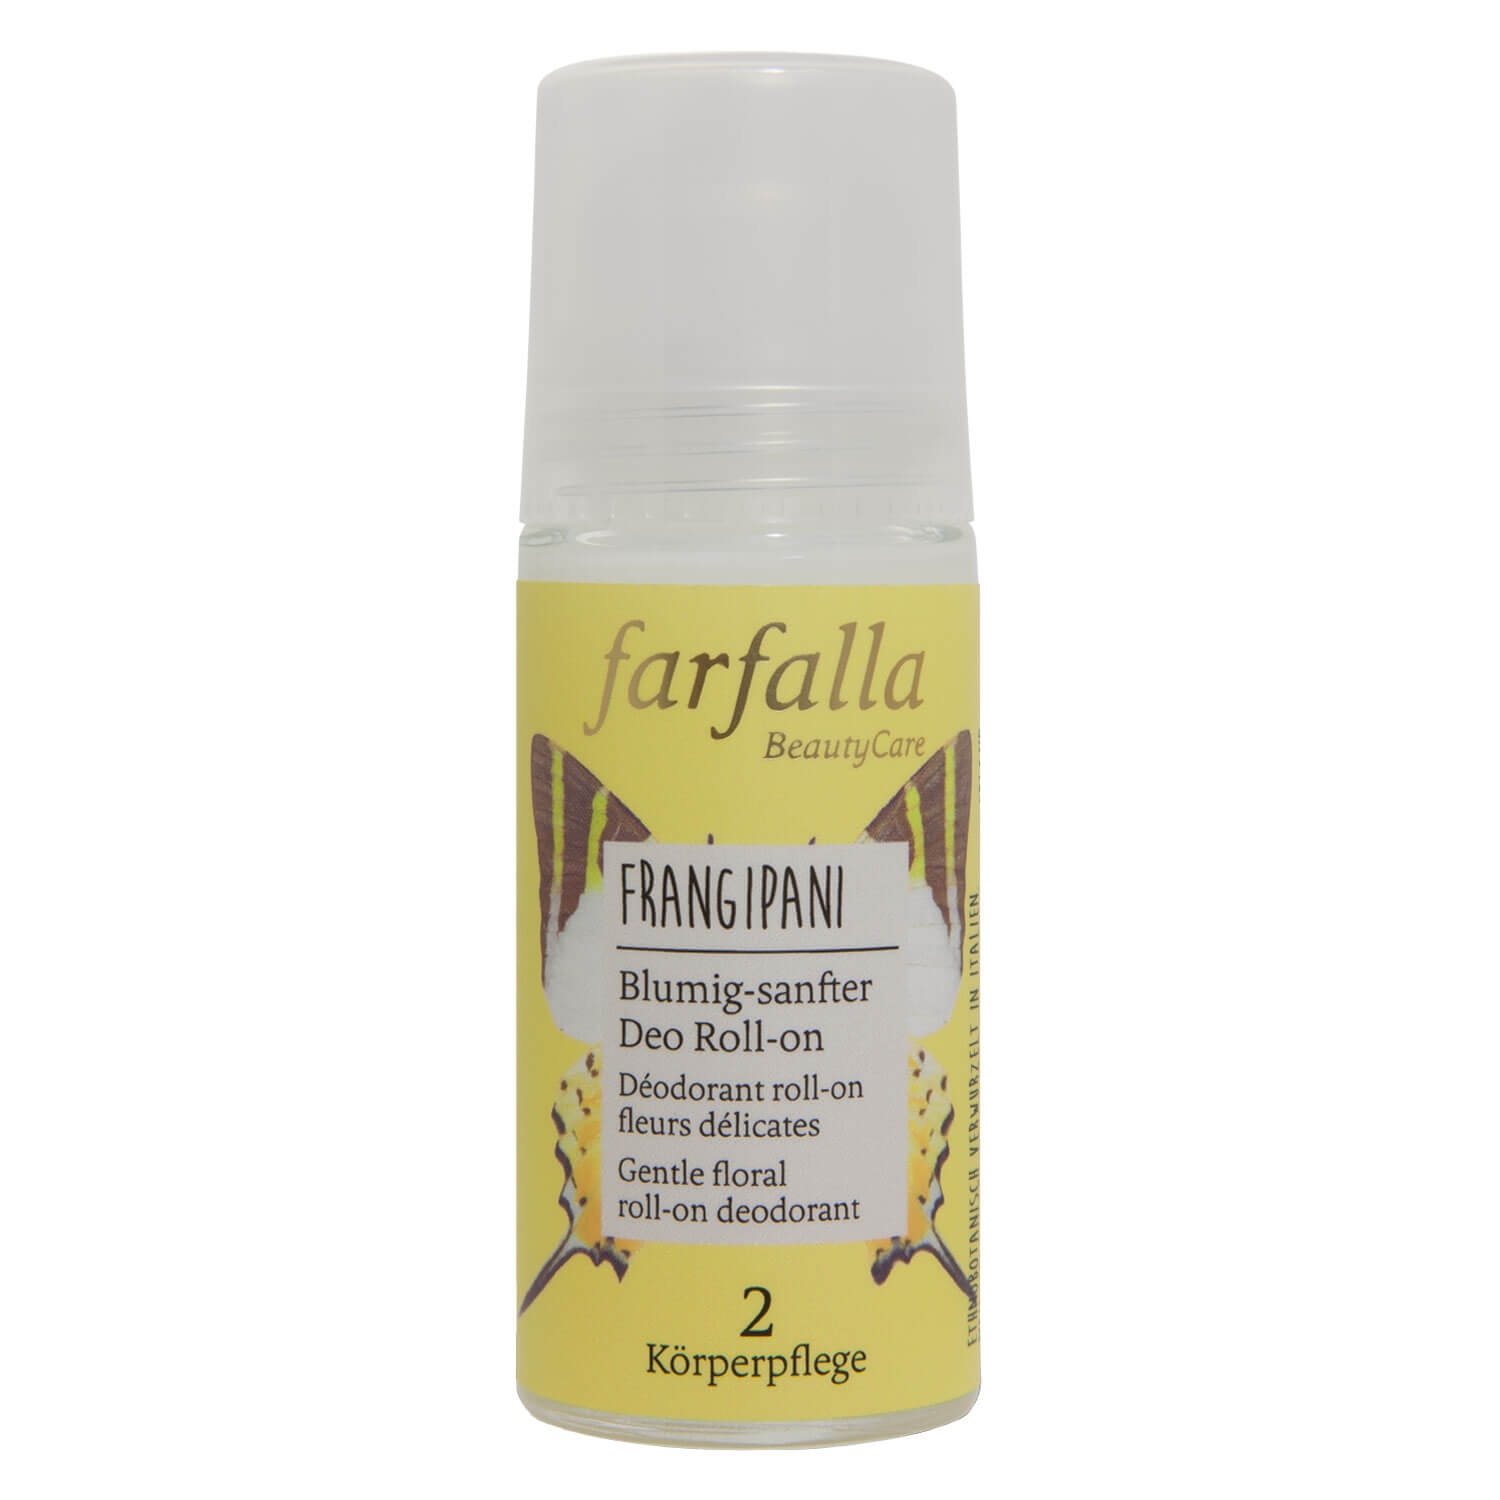 Product image from Farfalla Care - Frangipani, Blumig-sanfter Deo Roll-on